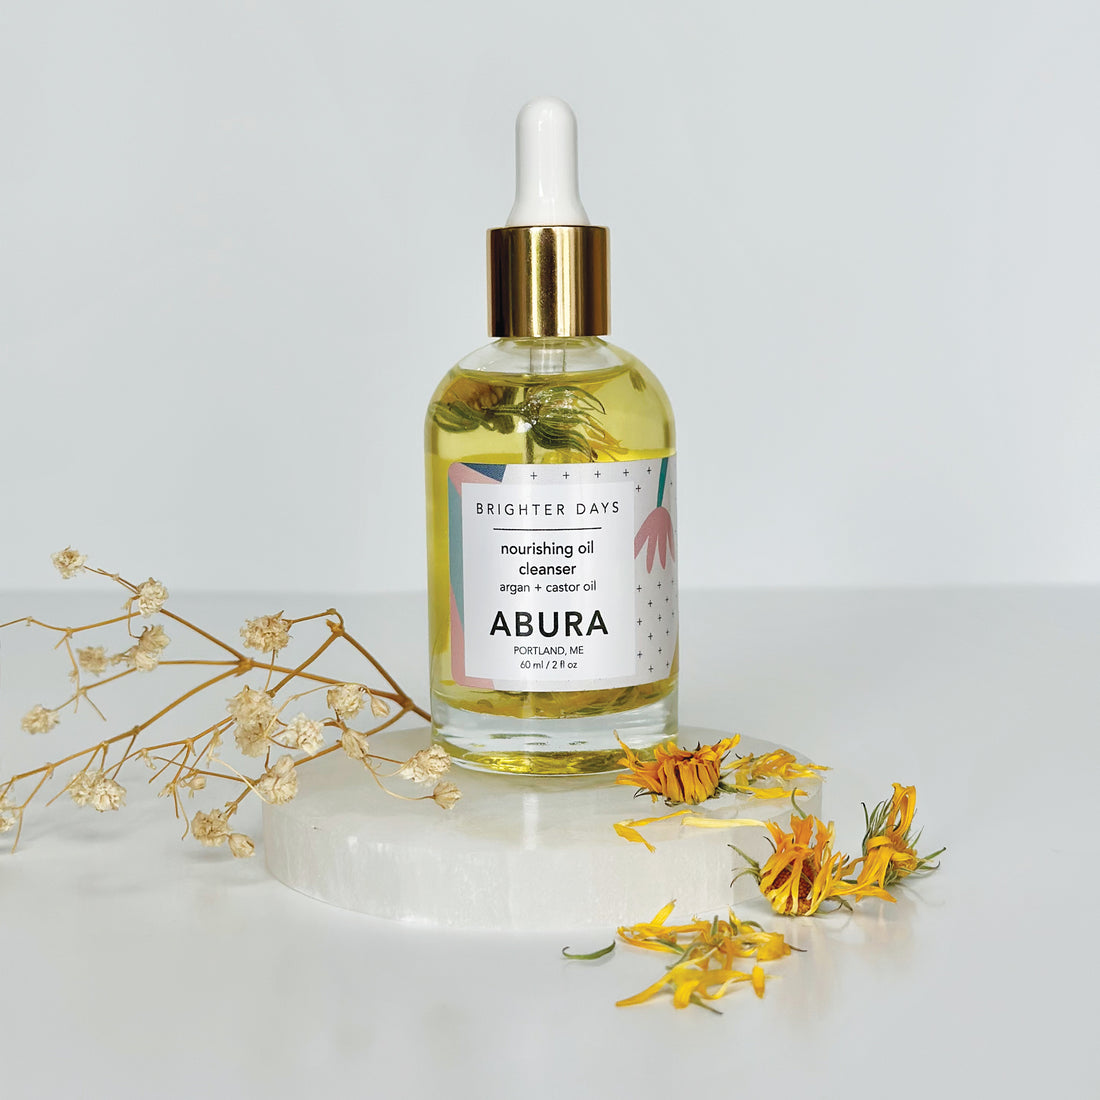 Brighter Days Nourishing Oil Cleanser - Portland Maine - Natural Skincare Products